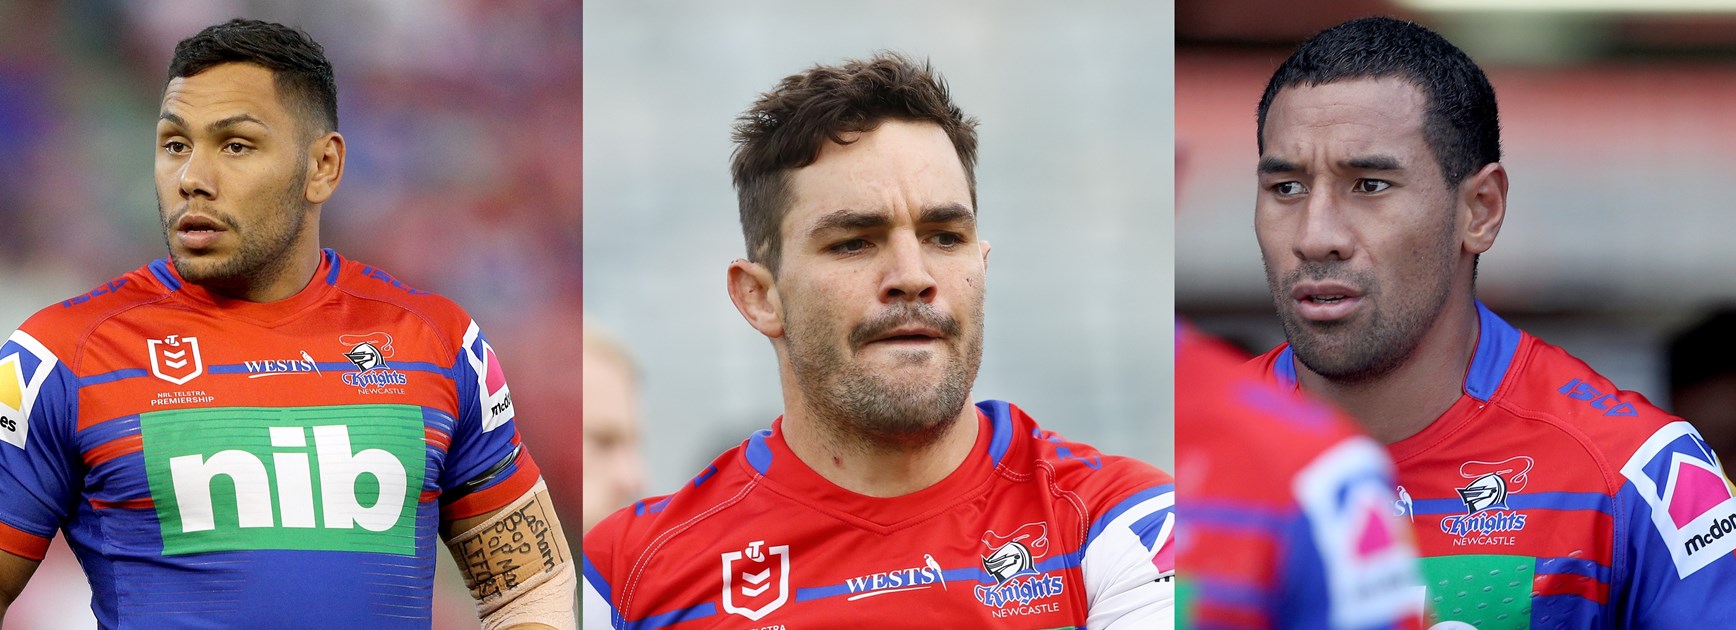 Injury update: Great news for Ramien and Moga